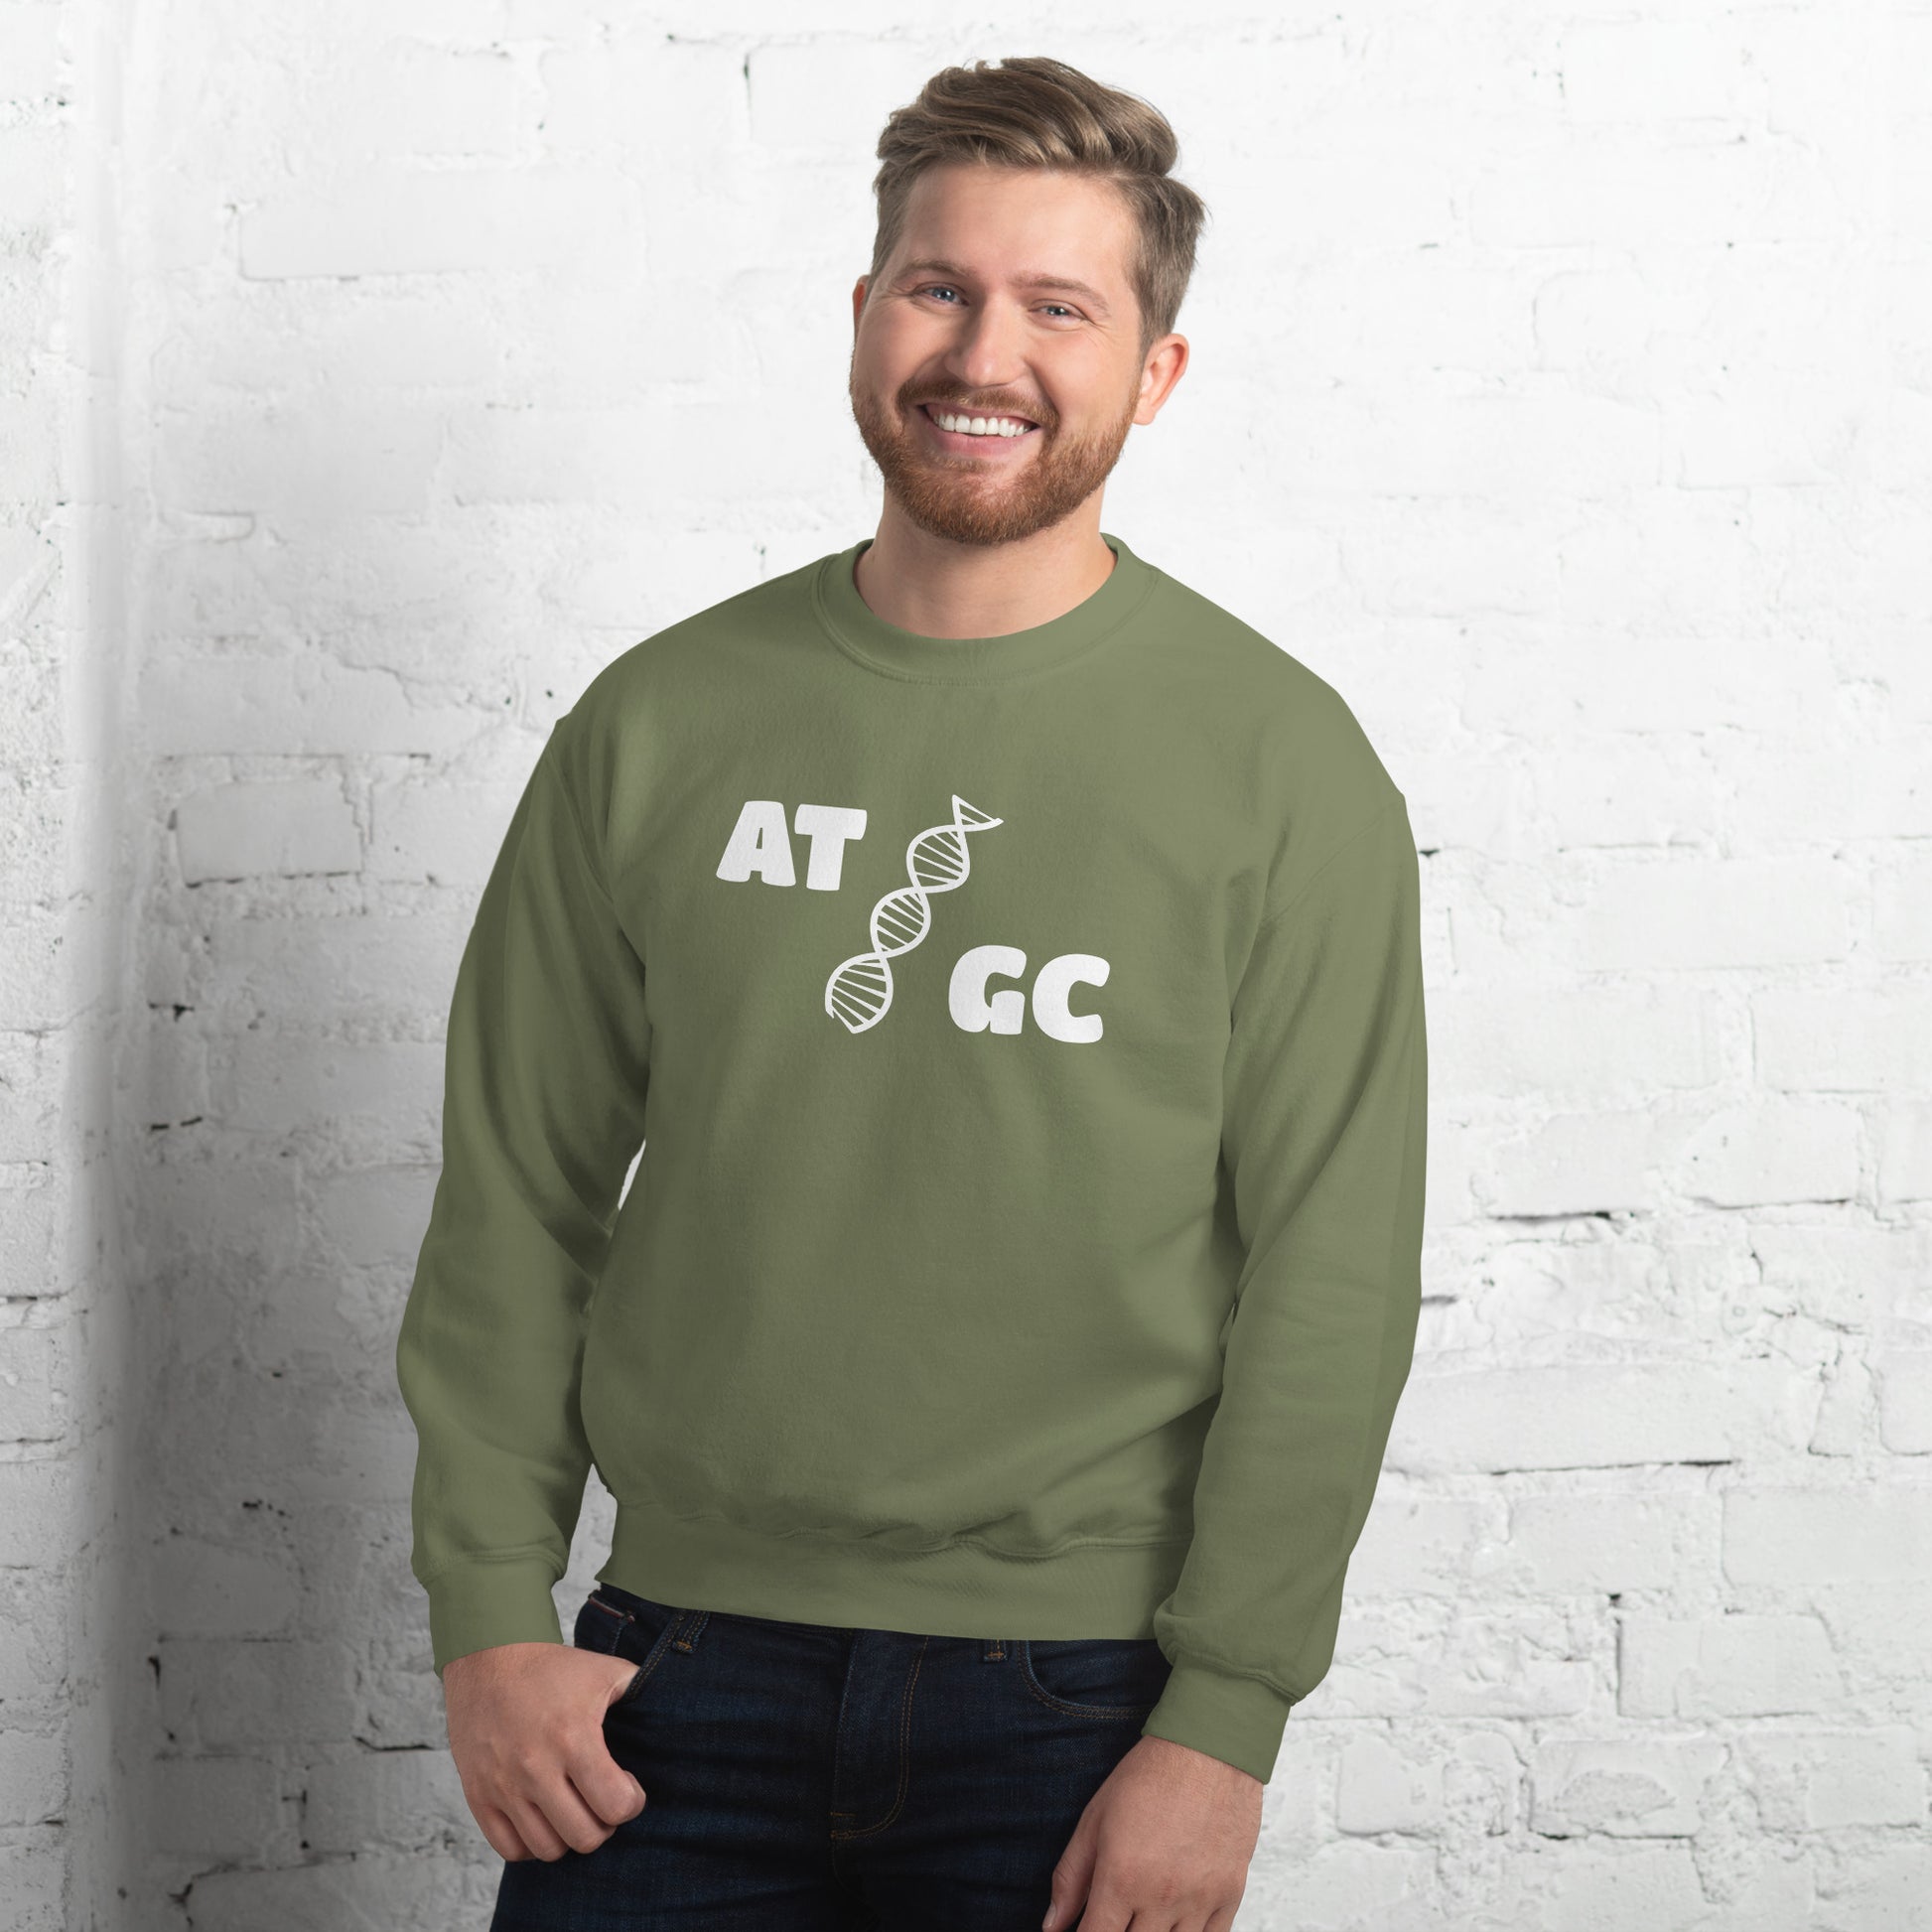 Men with military green sweatshirt with image of a DNA string and the text "ATGC"